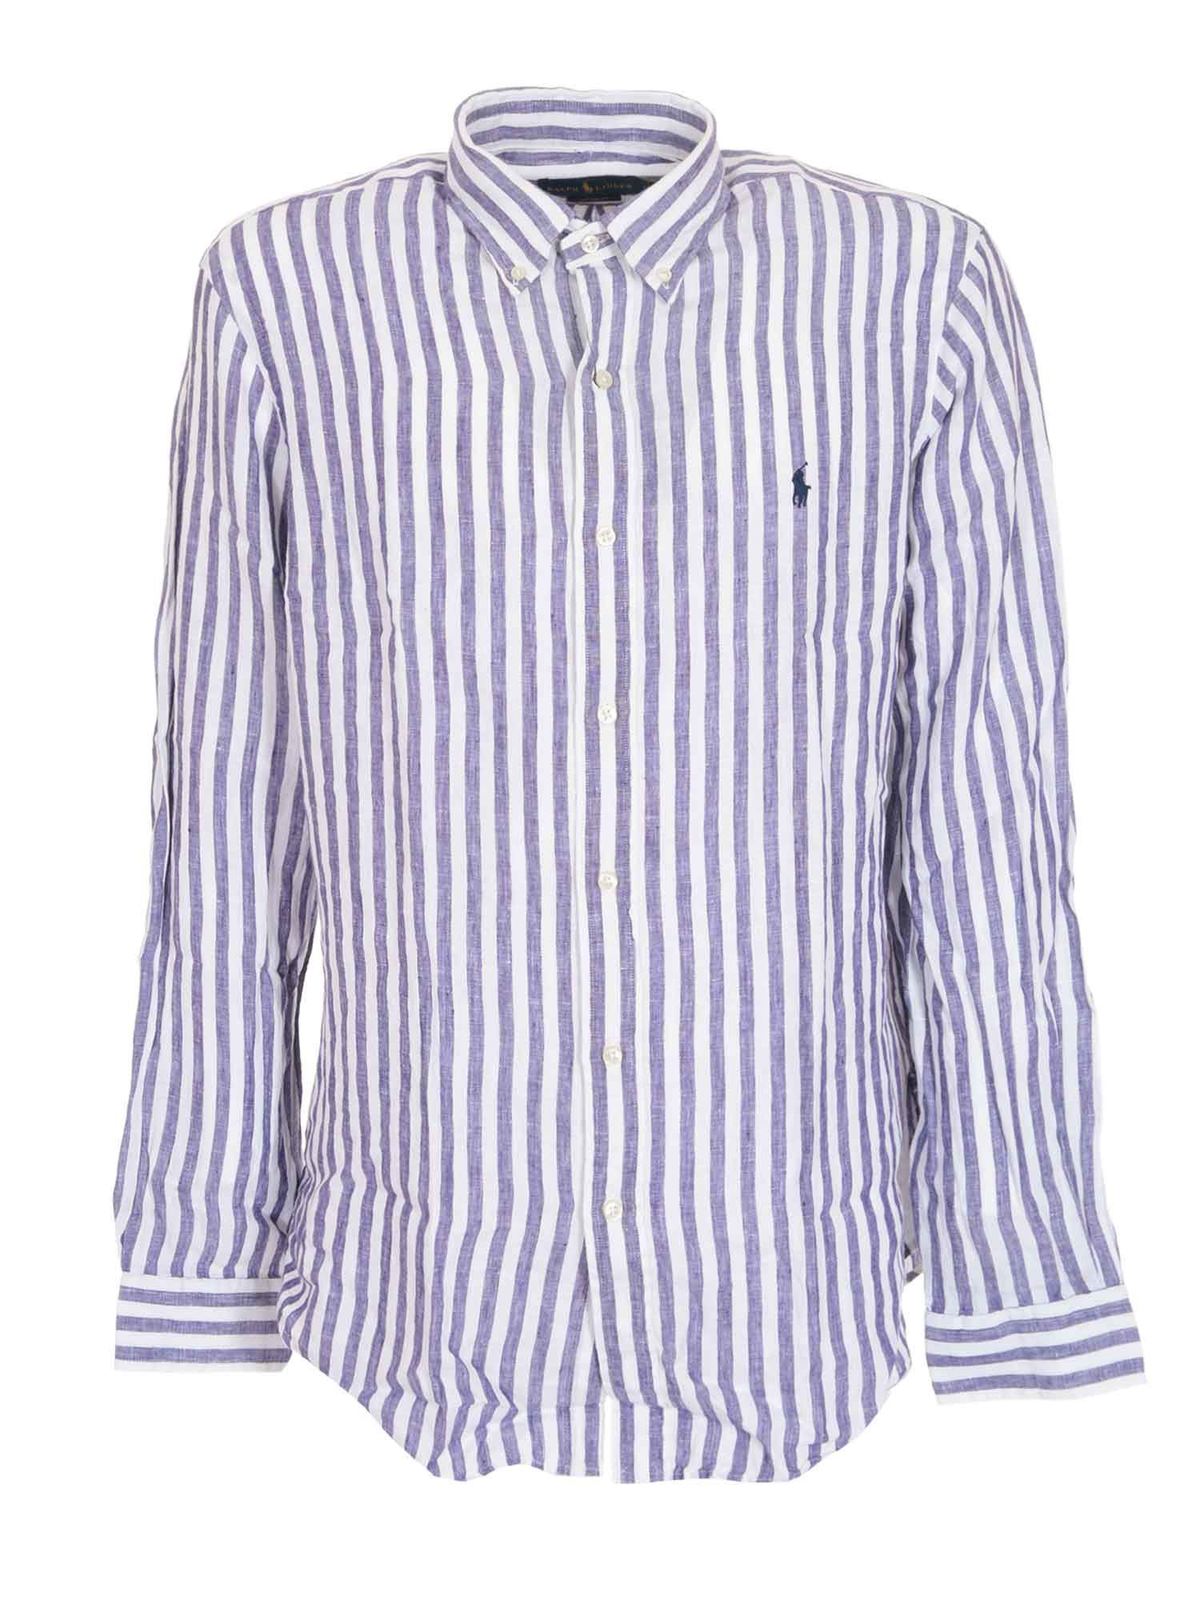 Polo Ralph Lauren Classic Striped Shirt In White And Blue